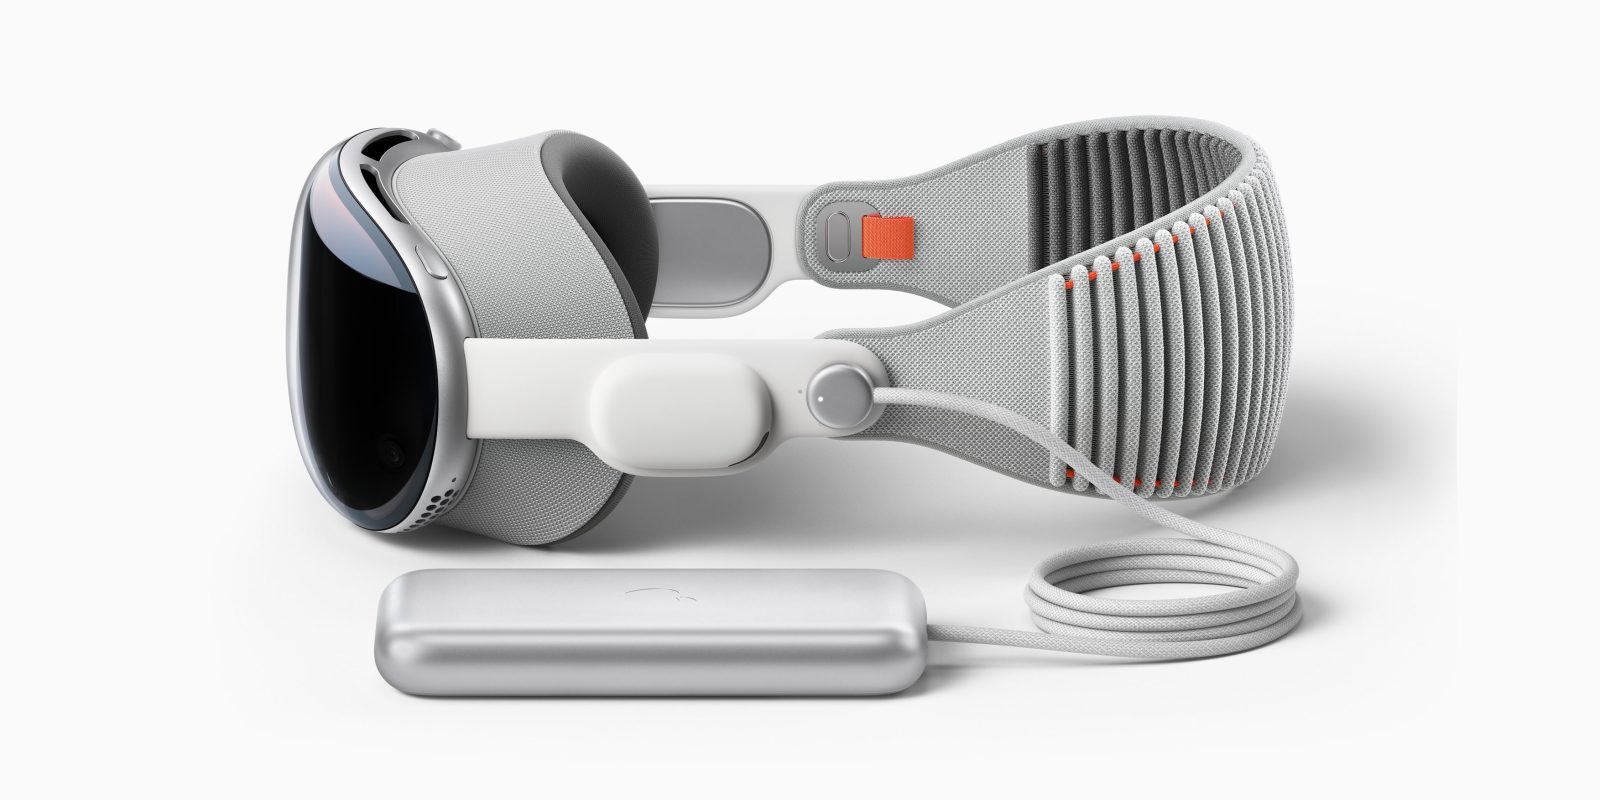 Belkin is making a battery clip accessory for apple vision